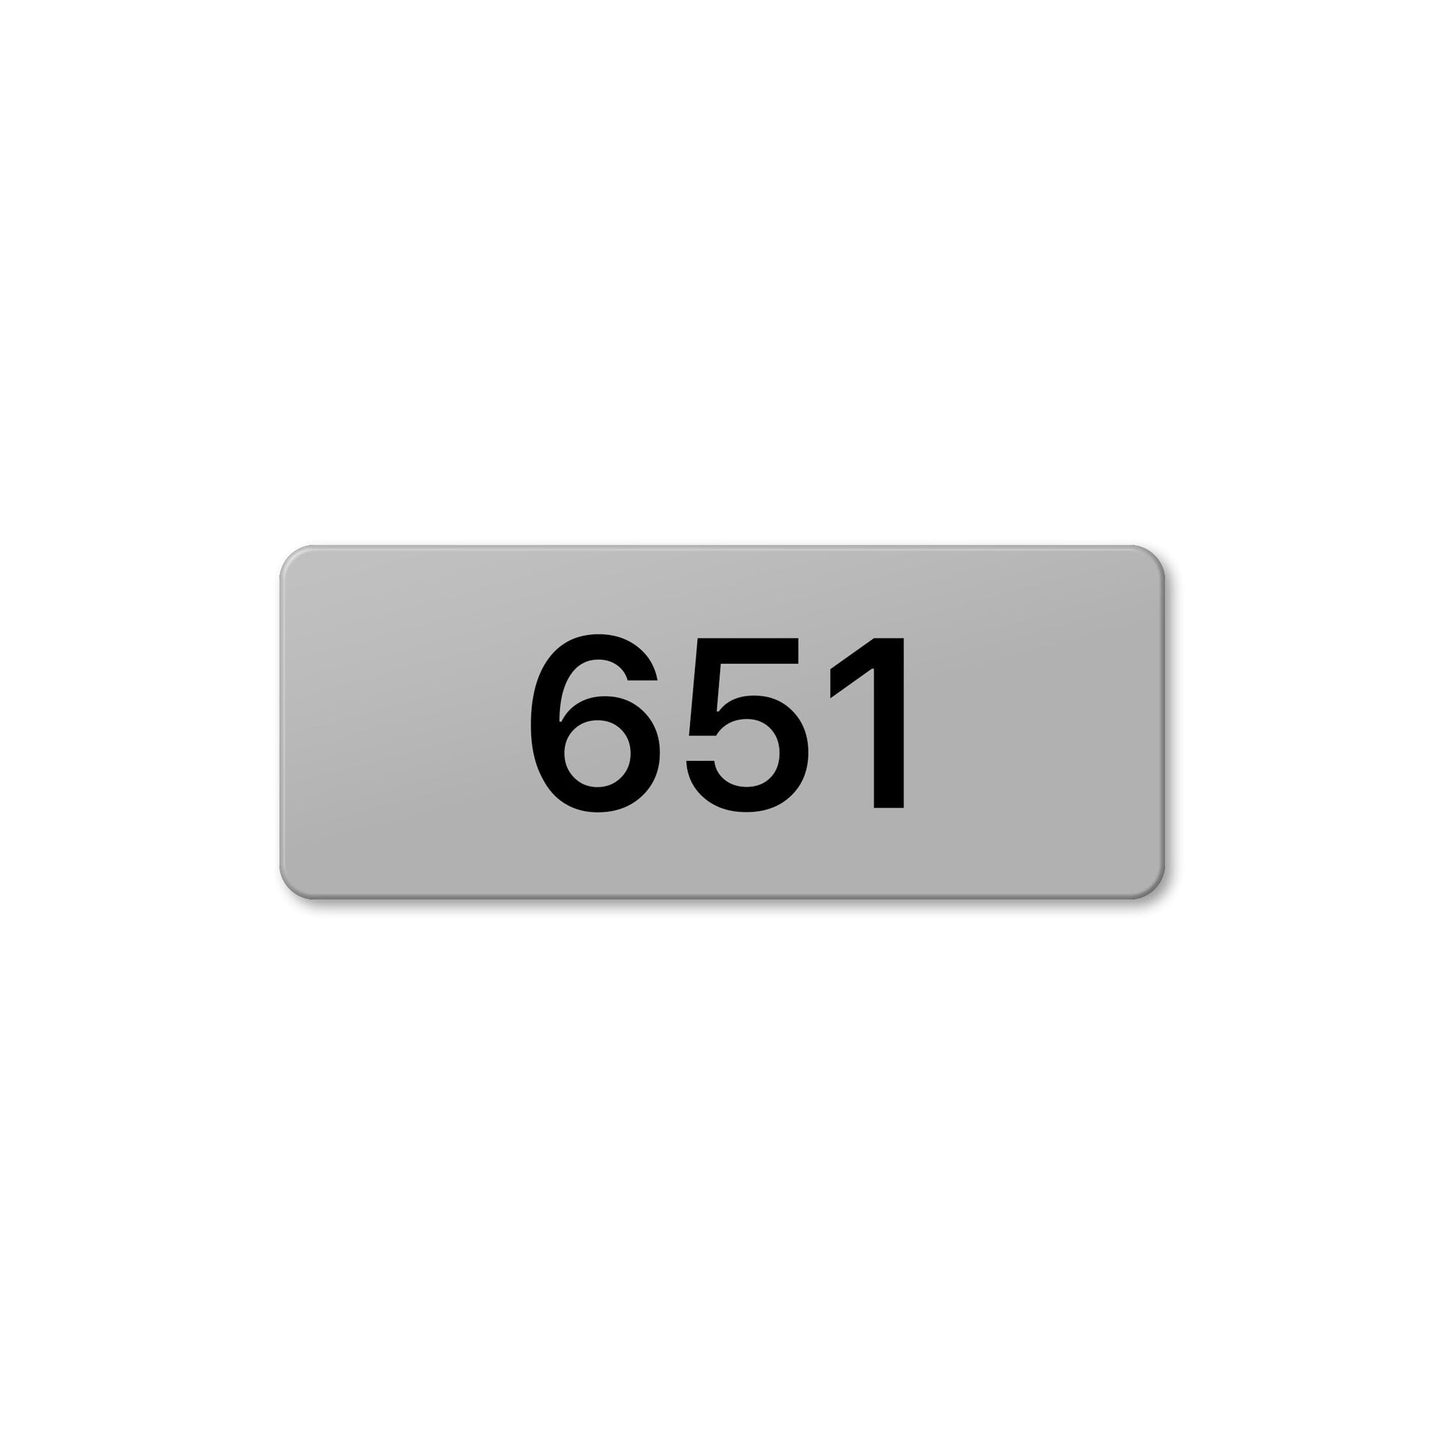 Numeral 651